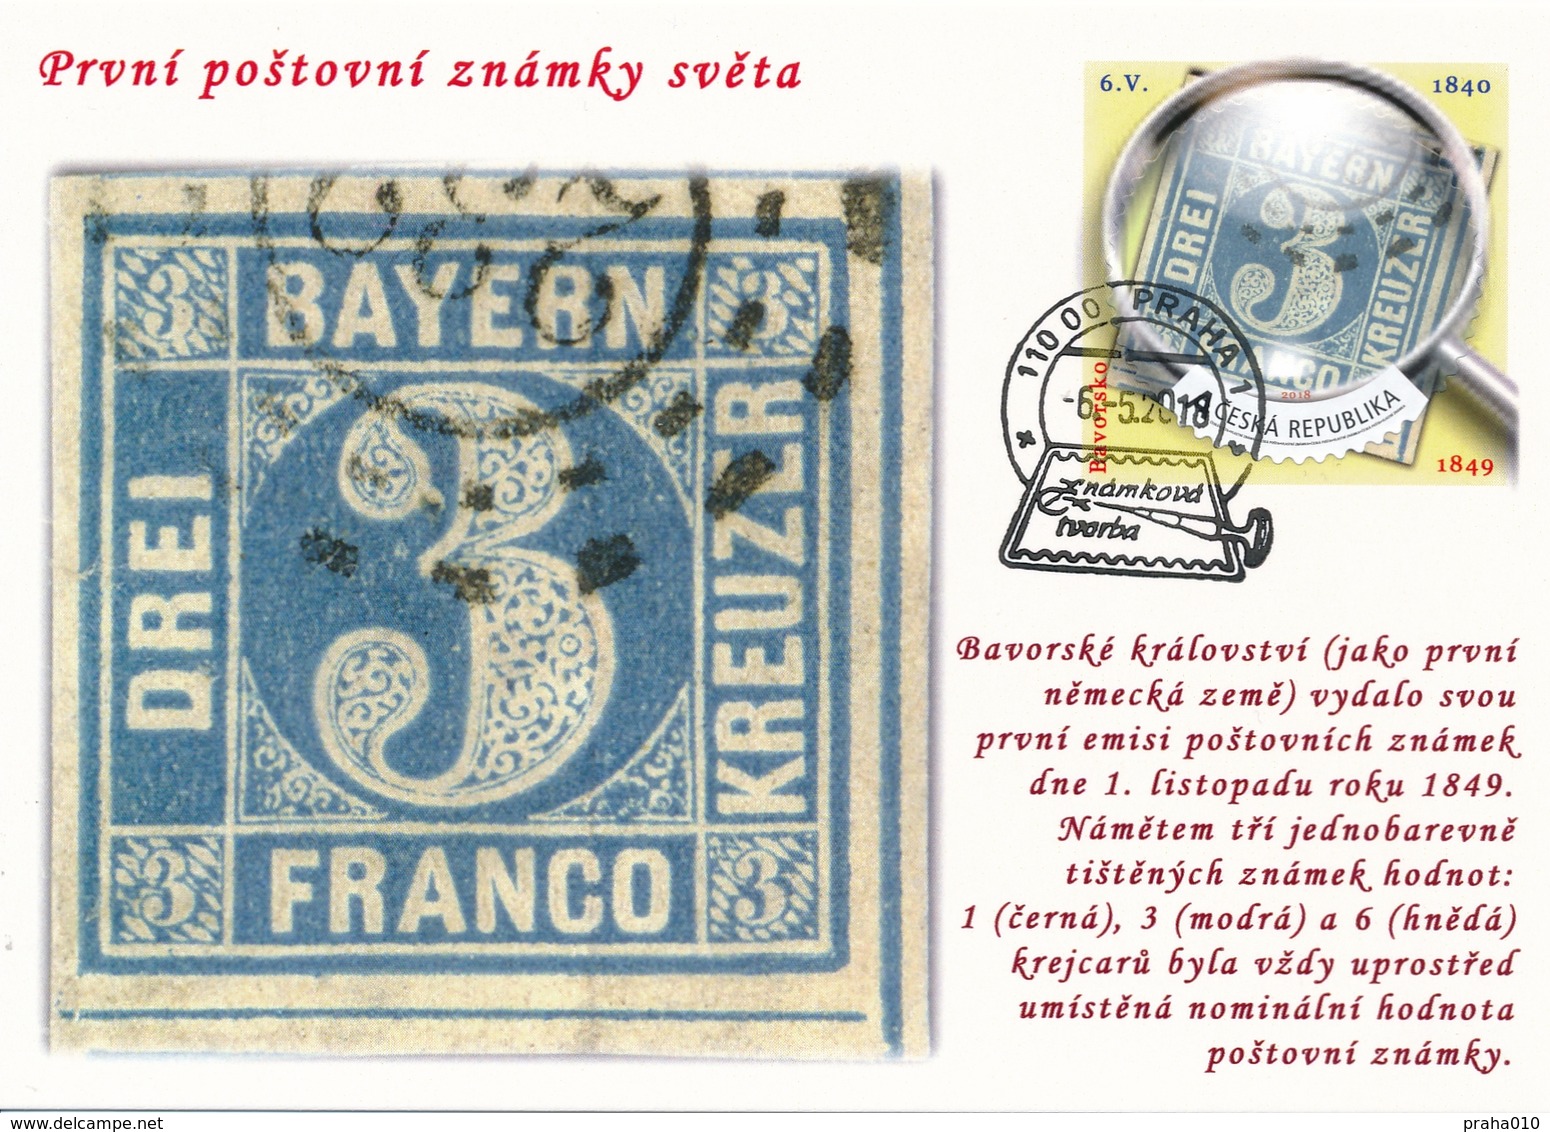 Czech rep. / My Own Stamps (2018) The world of philately (CM) Cartes maxima (complete set - 25 pcs.)